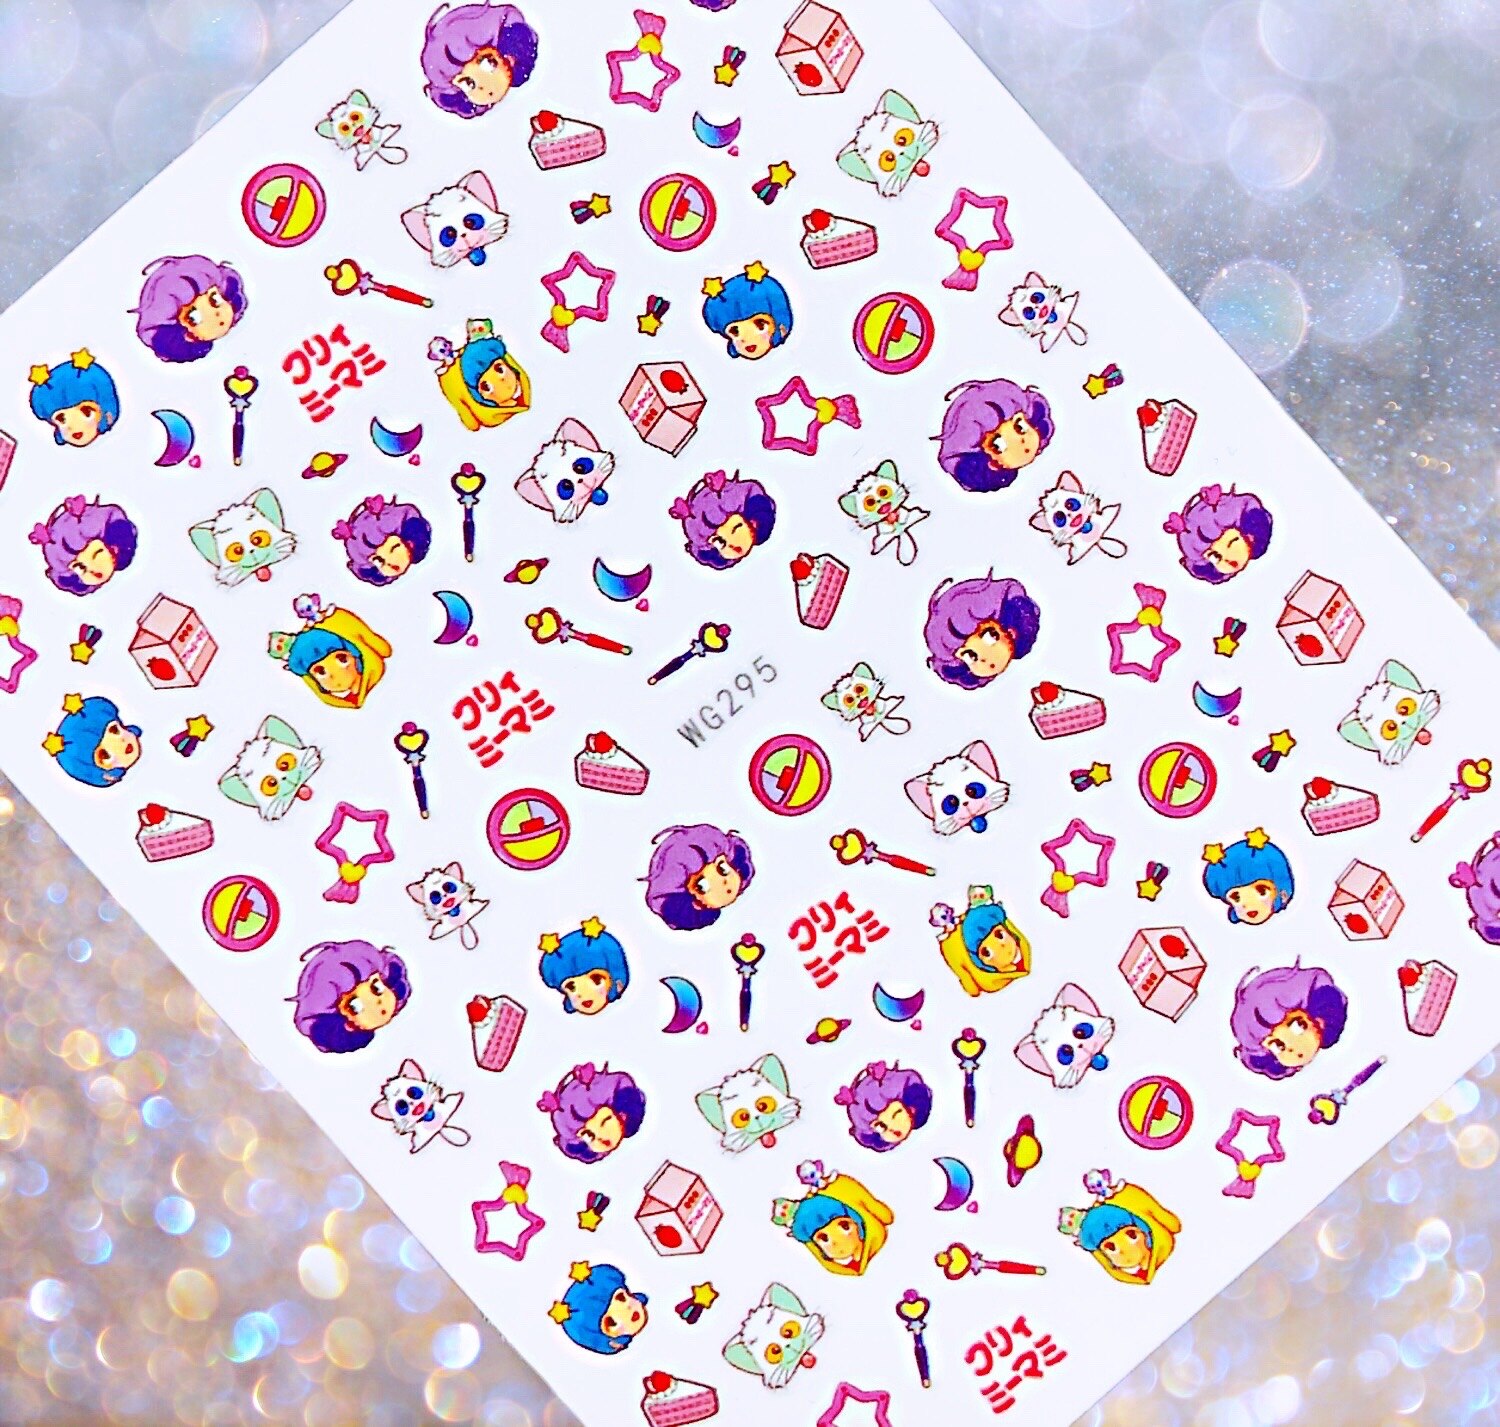 Sailor Moon – All Characters and Accessories Themed Sheet of Stickers (7 Designs) Posters